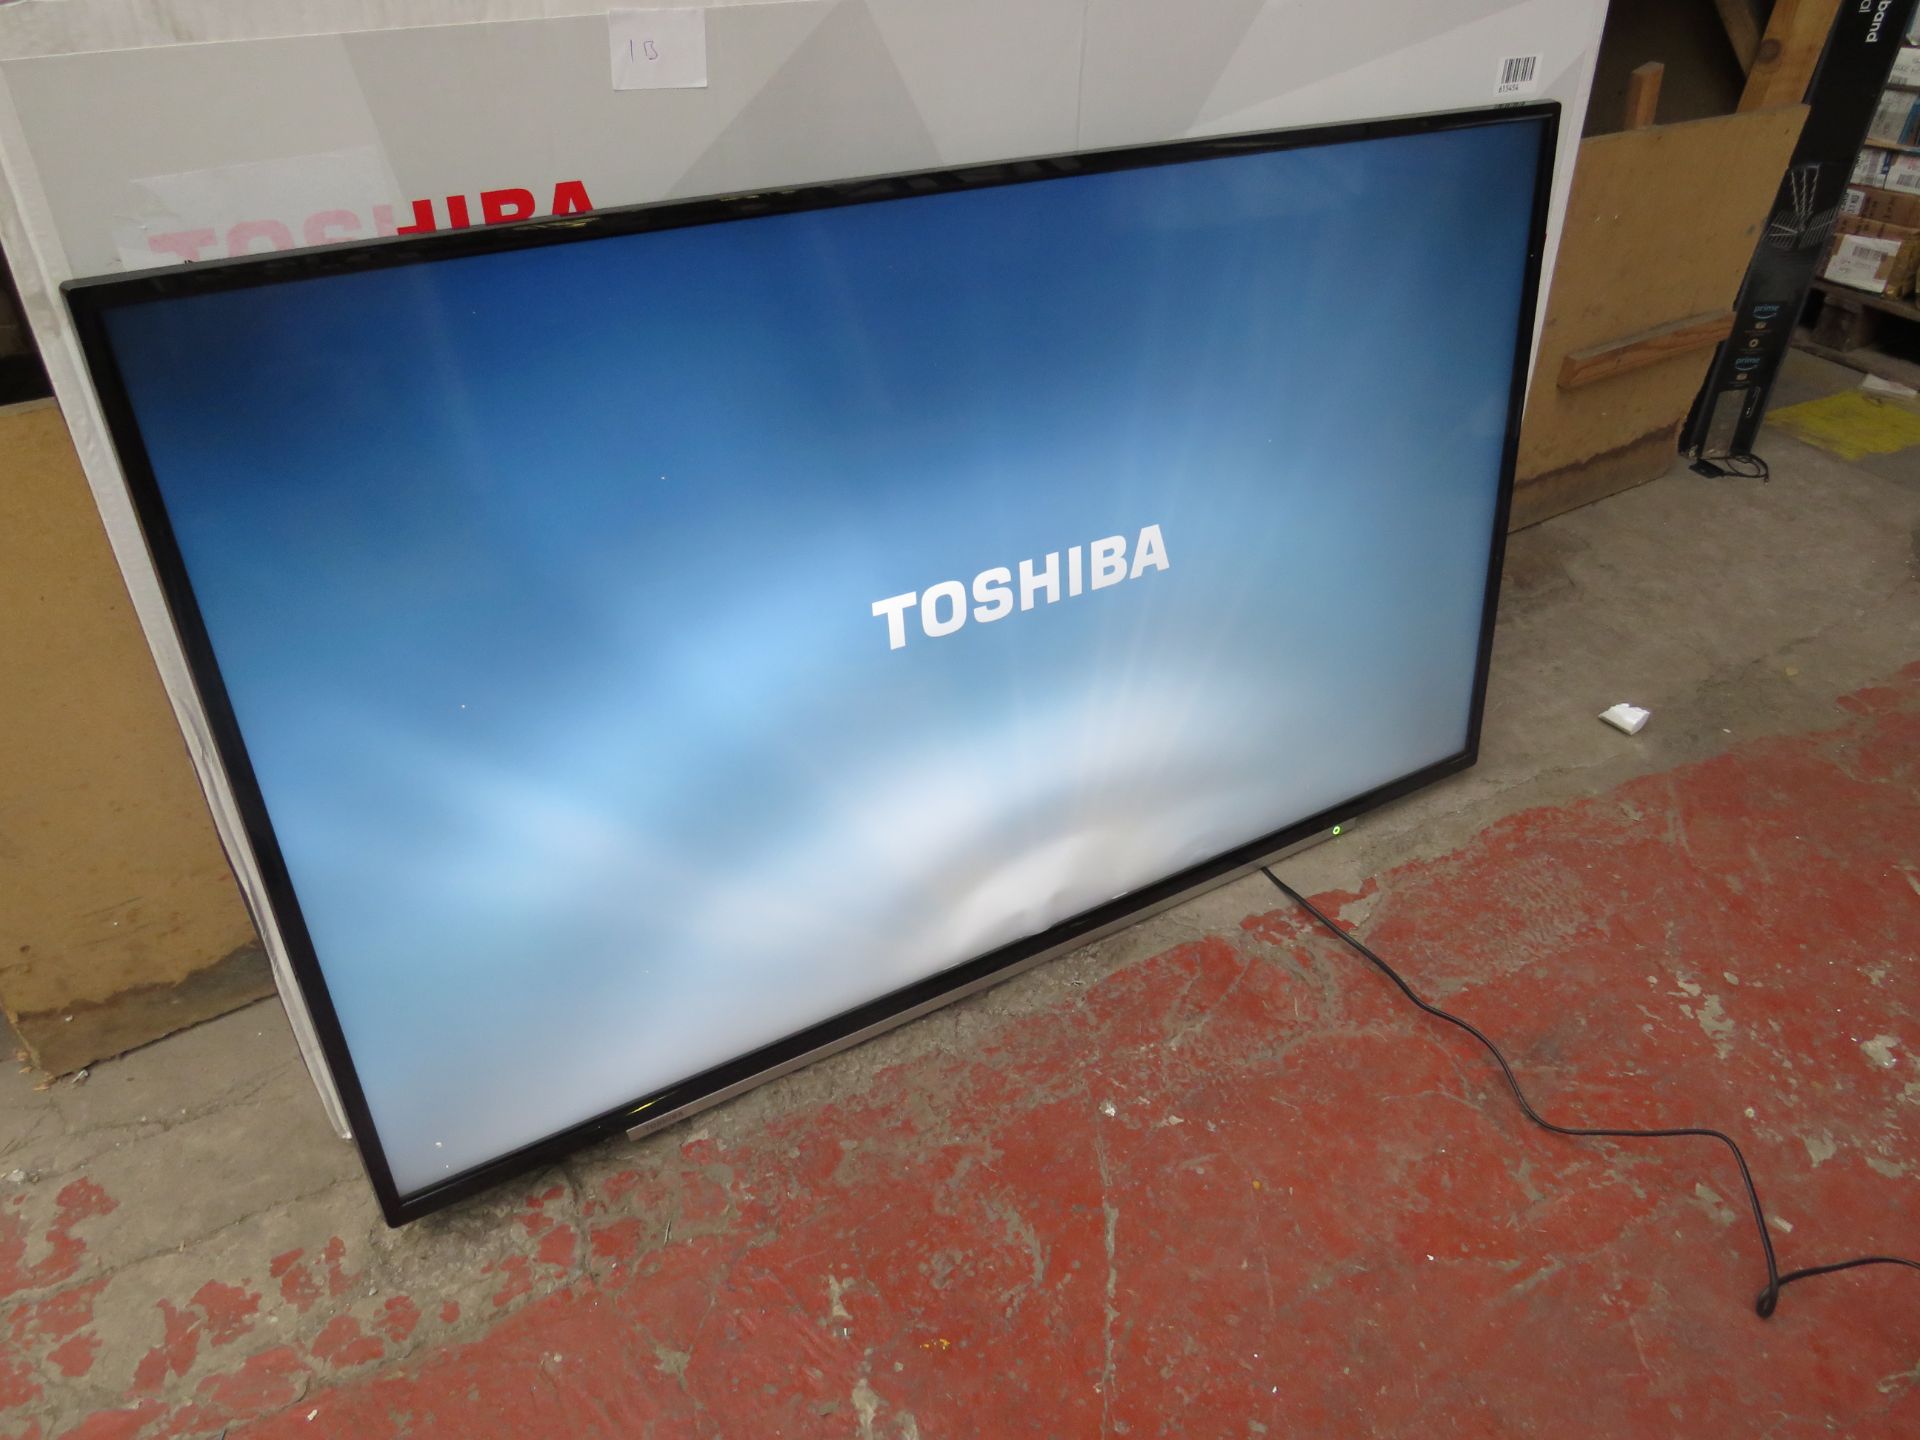 Toshiba 55" 4K HDR TV, tested working but display showing it has a bent near the bottom. No stand.